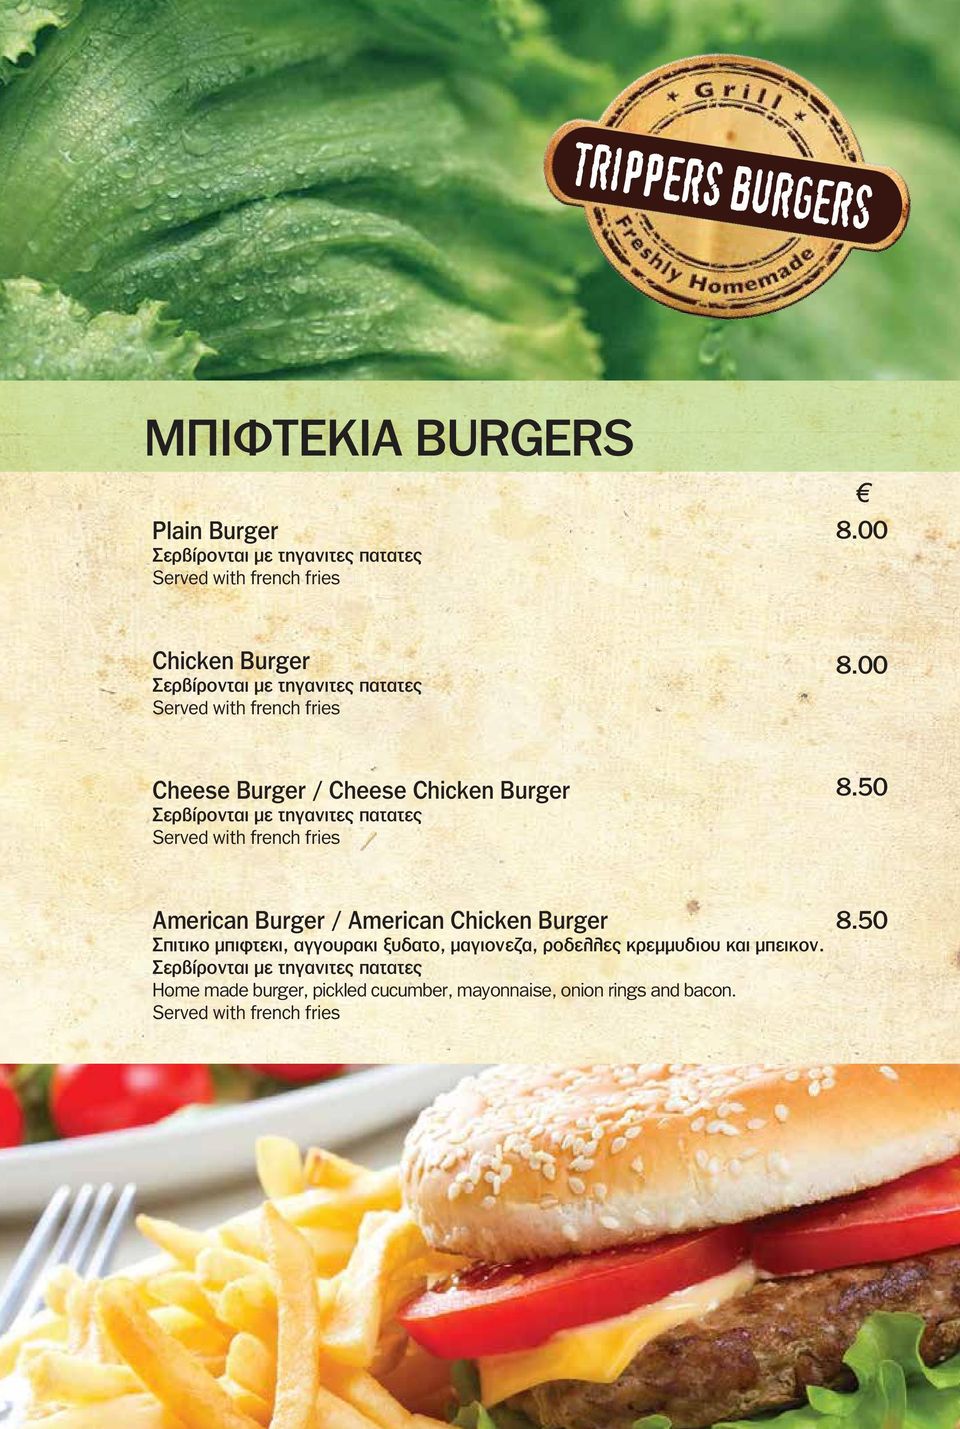 00 Cheese Burger / Cheese Chicken Burger Σερβίρονται µε τηγανιτες πατατες Served with french fries 8.